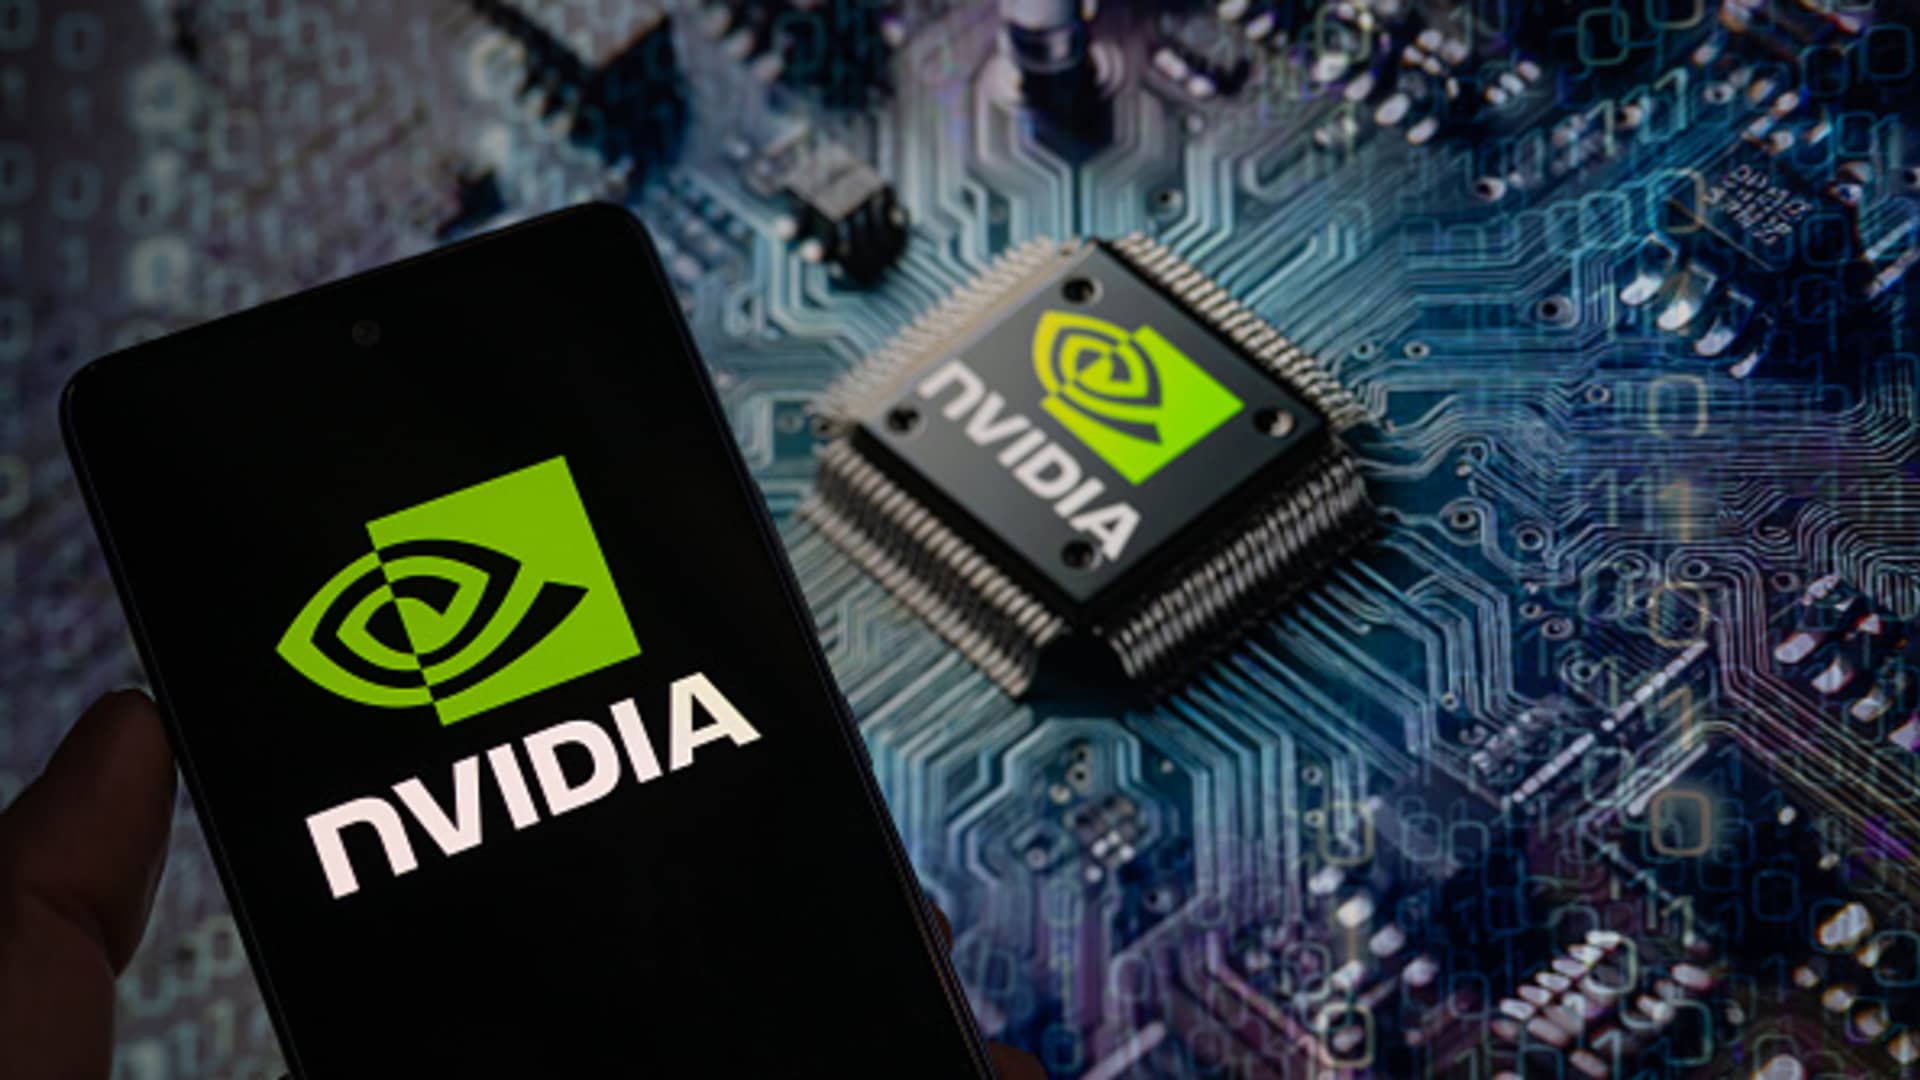 Stocks making the biggest moves after hours: Nvidia, Etsy, Rivian, Lucid Group and more